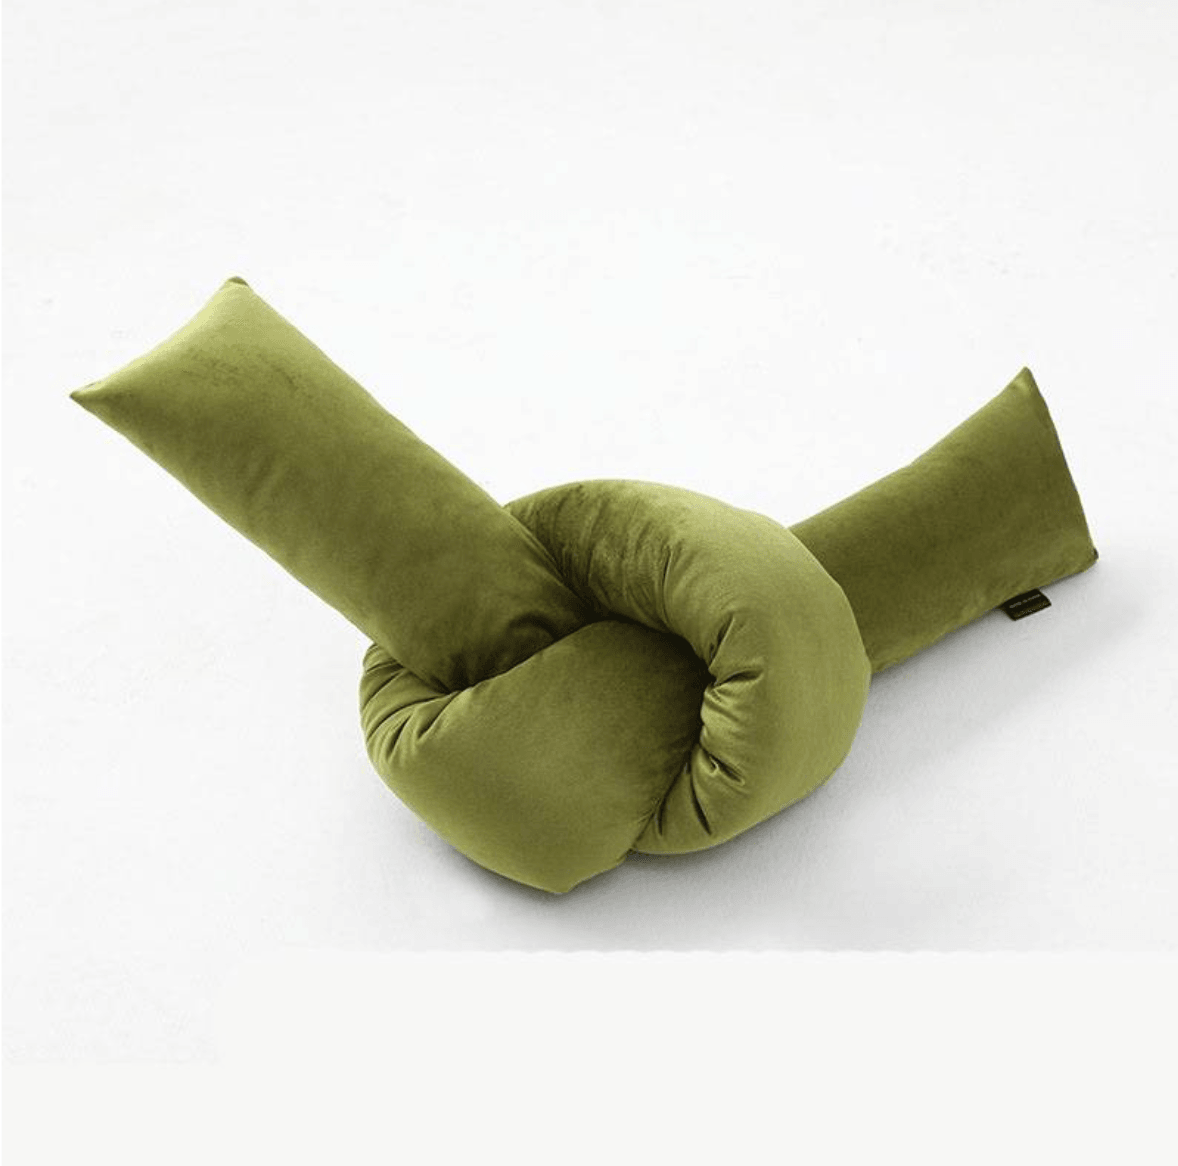 Velvety Retro Shapes Pillow Knot Strip / OliveDrab | Sage & Sill